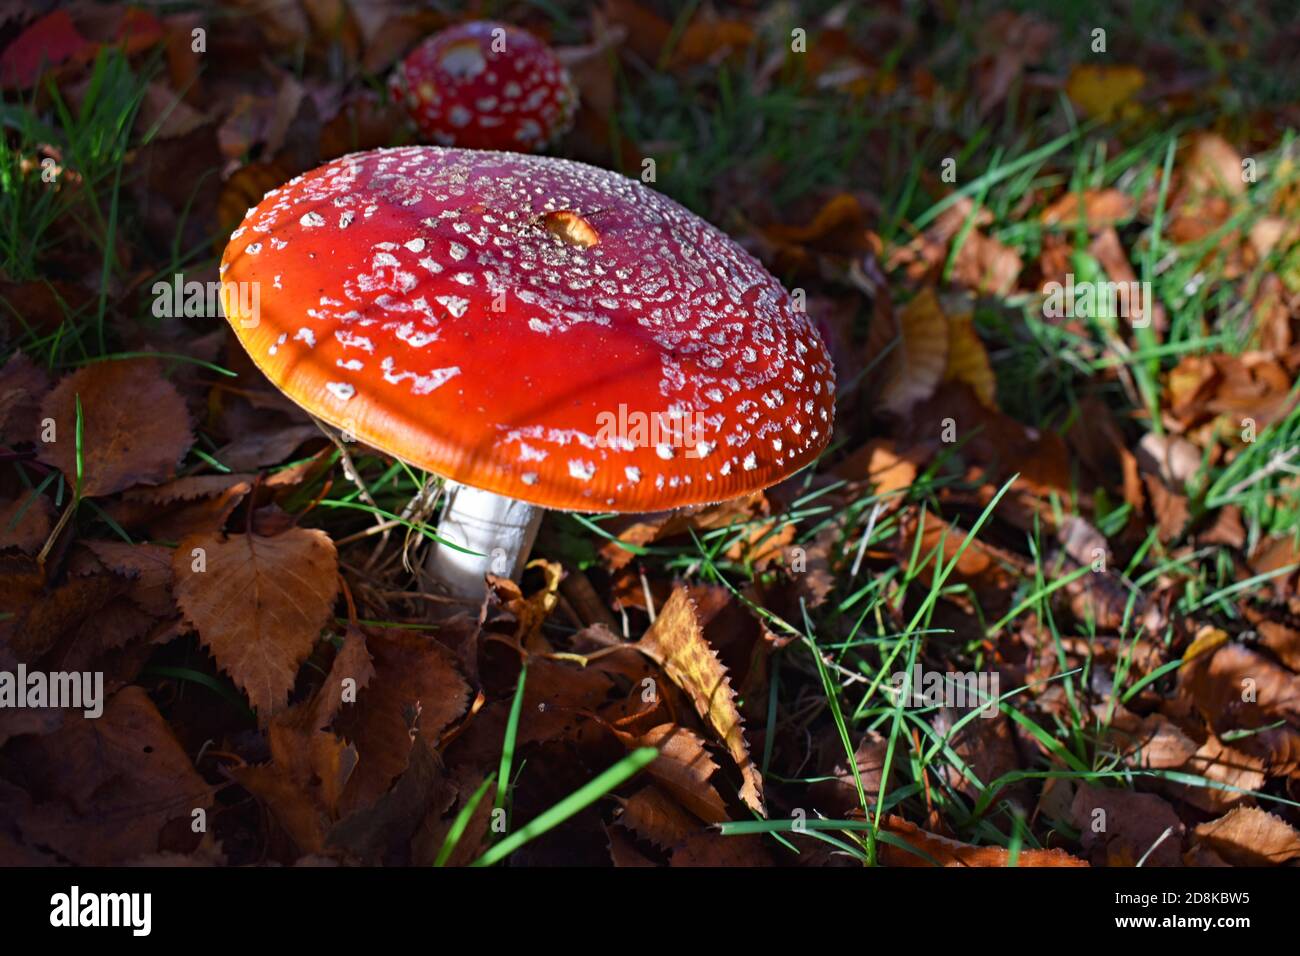 Amanita muscaria, commonly known as the fly agaric against a background of grass and fallen brown leaves.  A smaller mushroom stands behind. Stock Photo